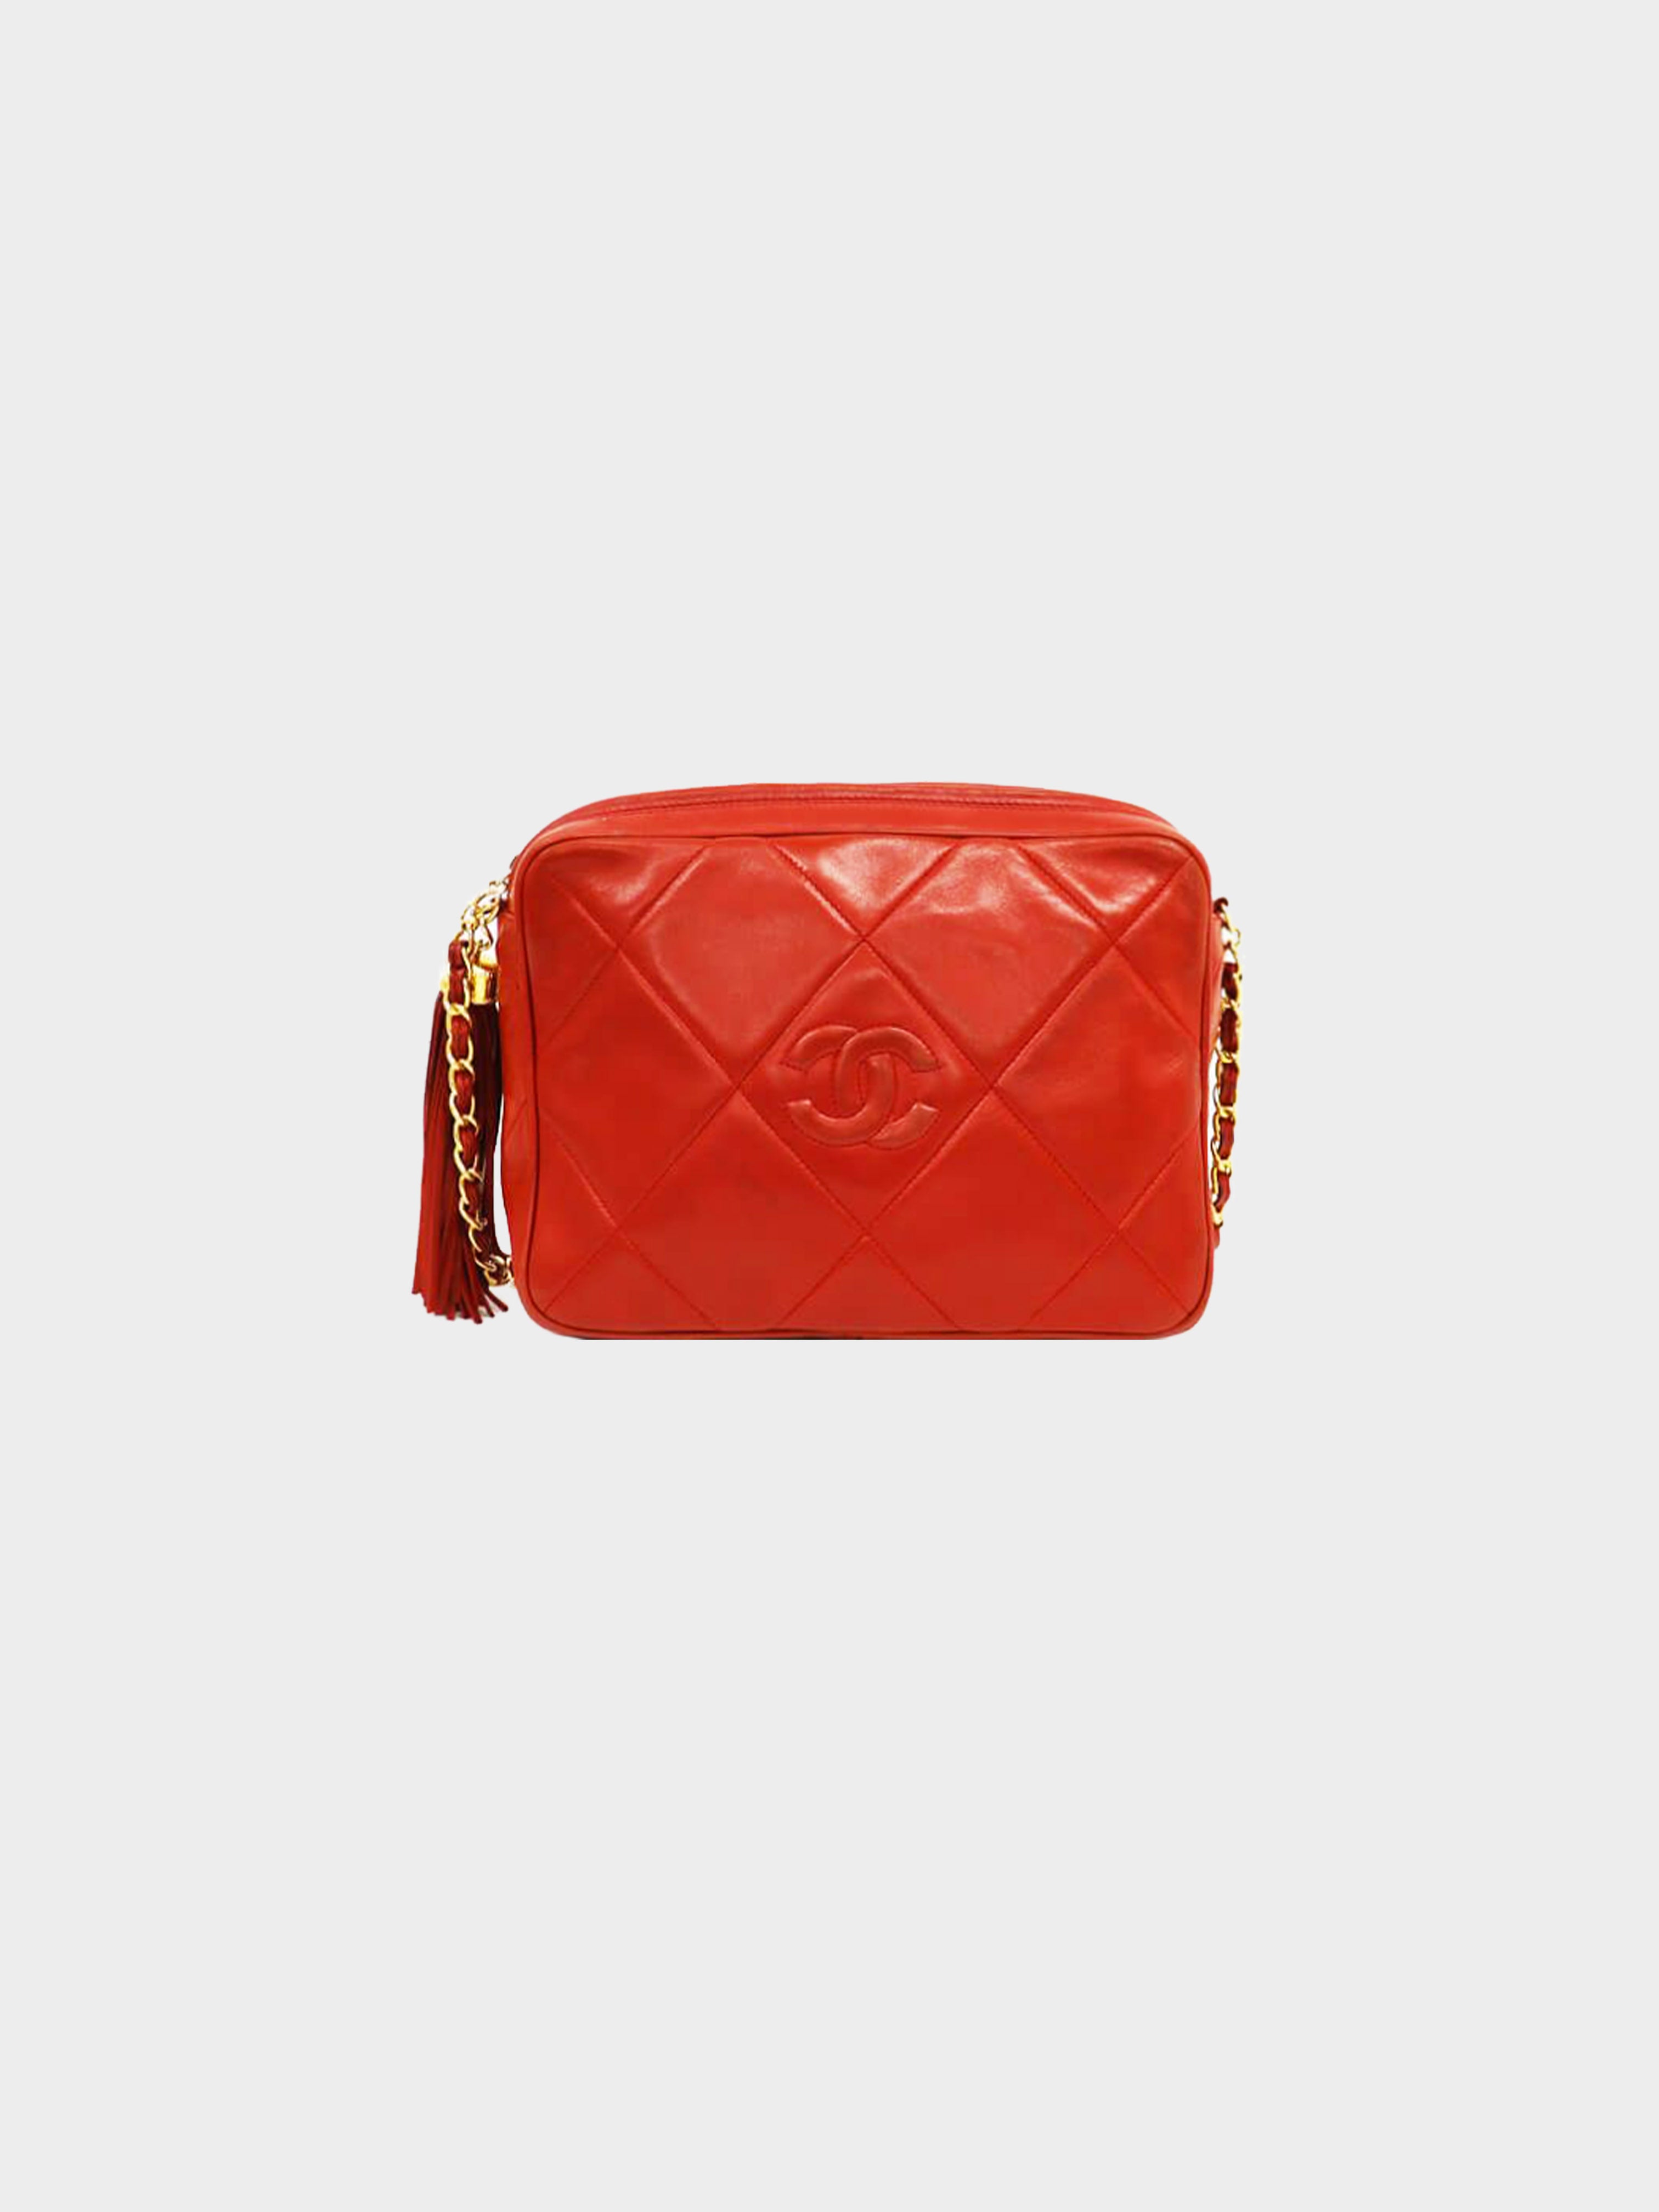 chanel red quilted handbag